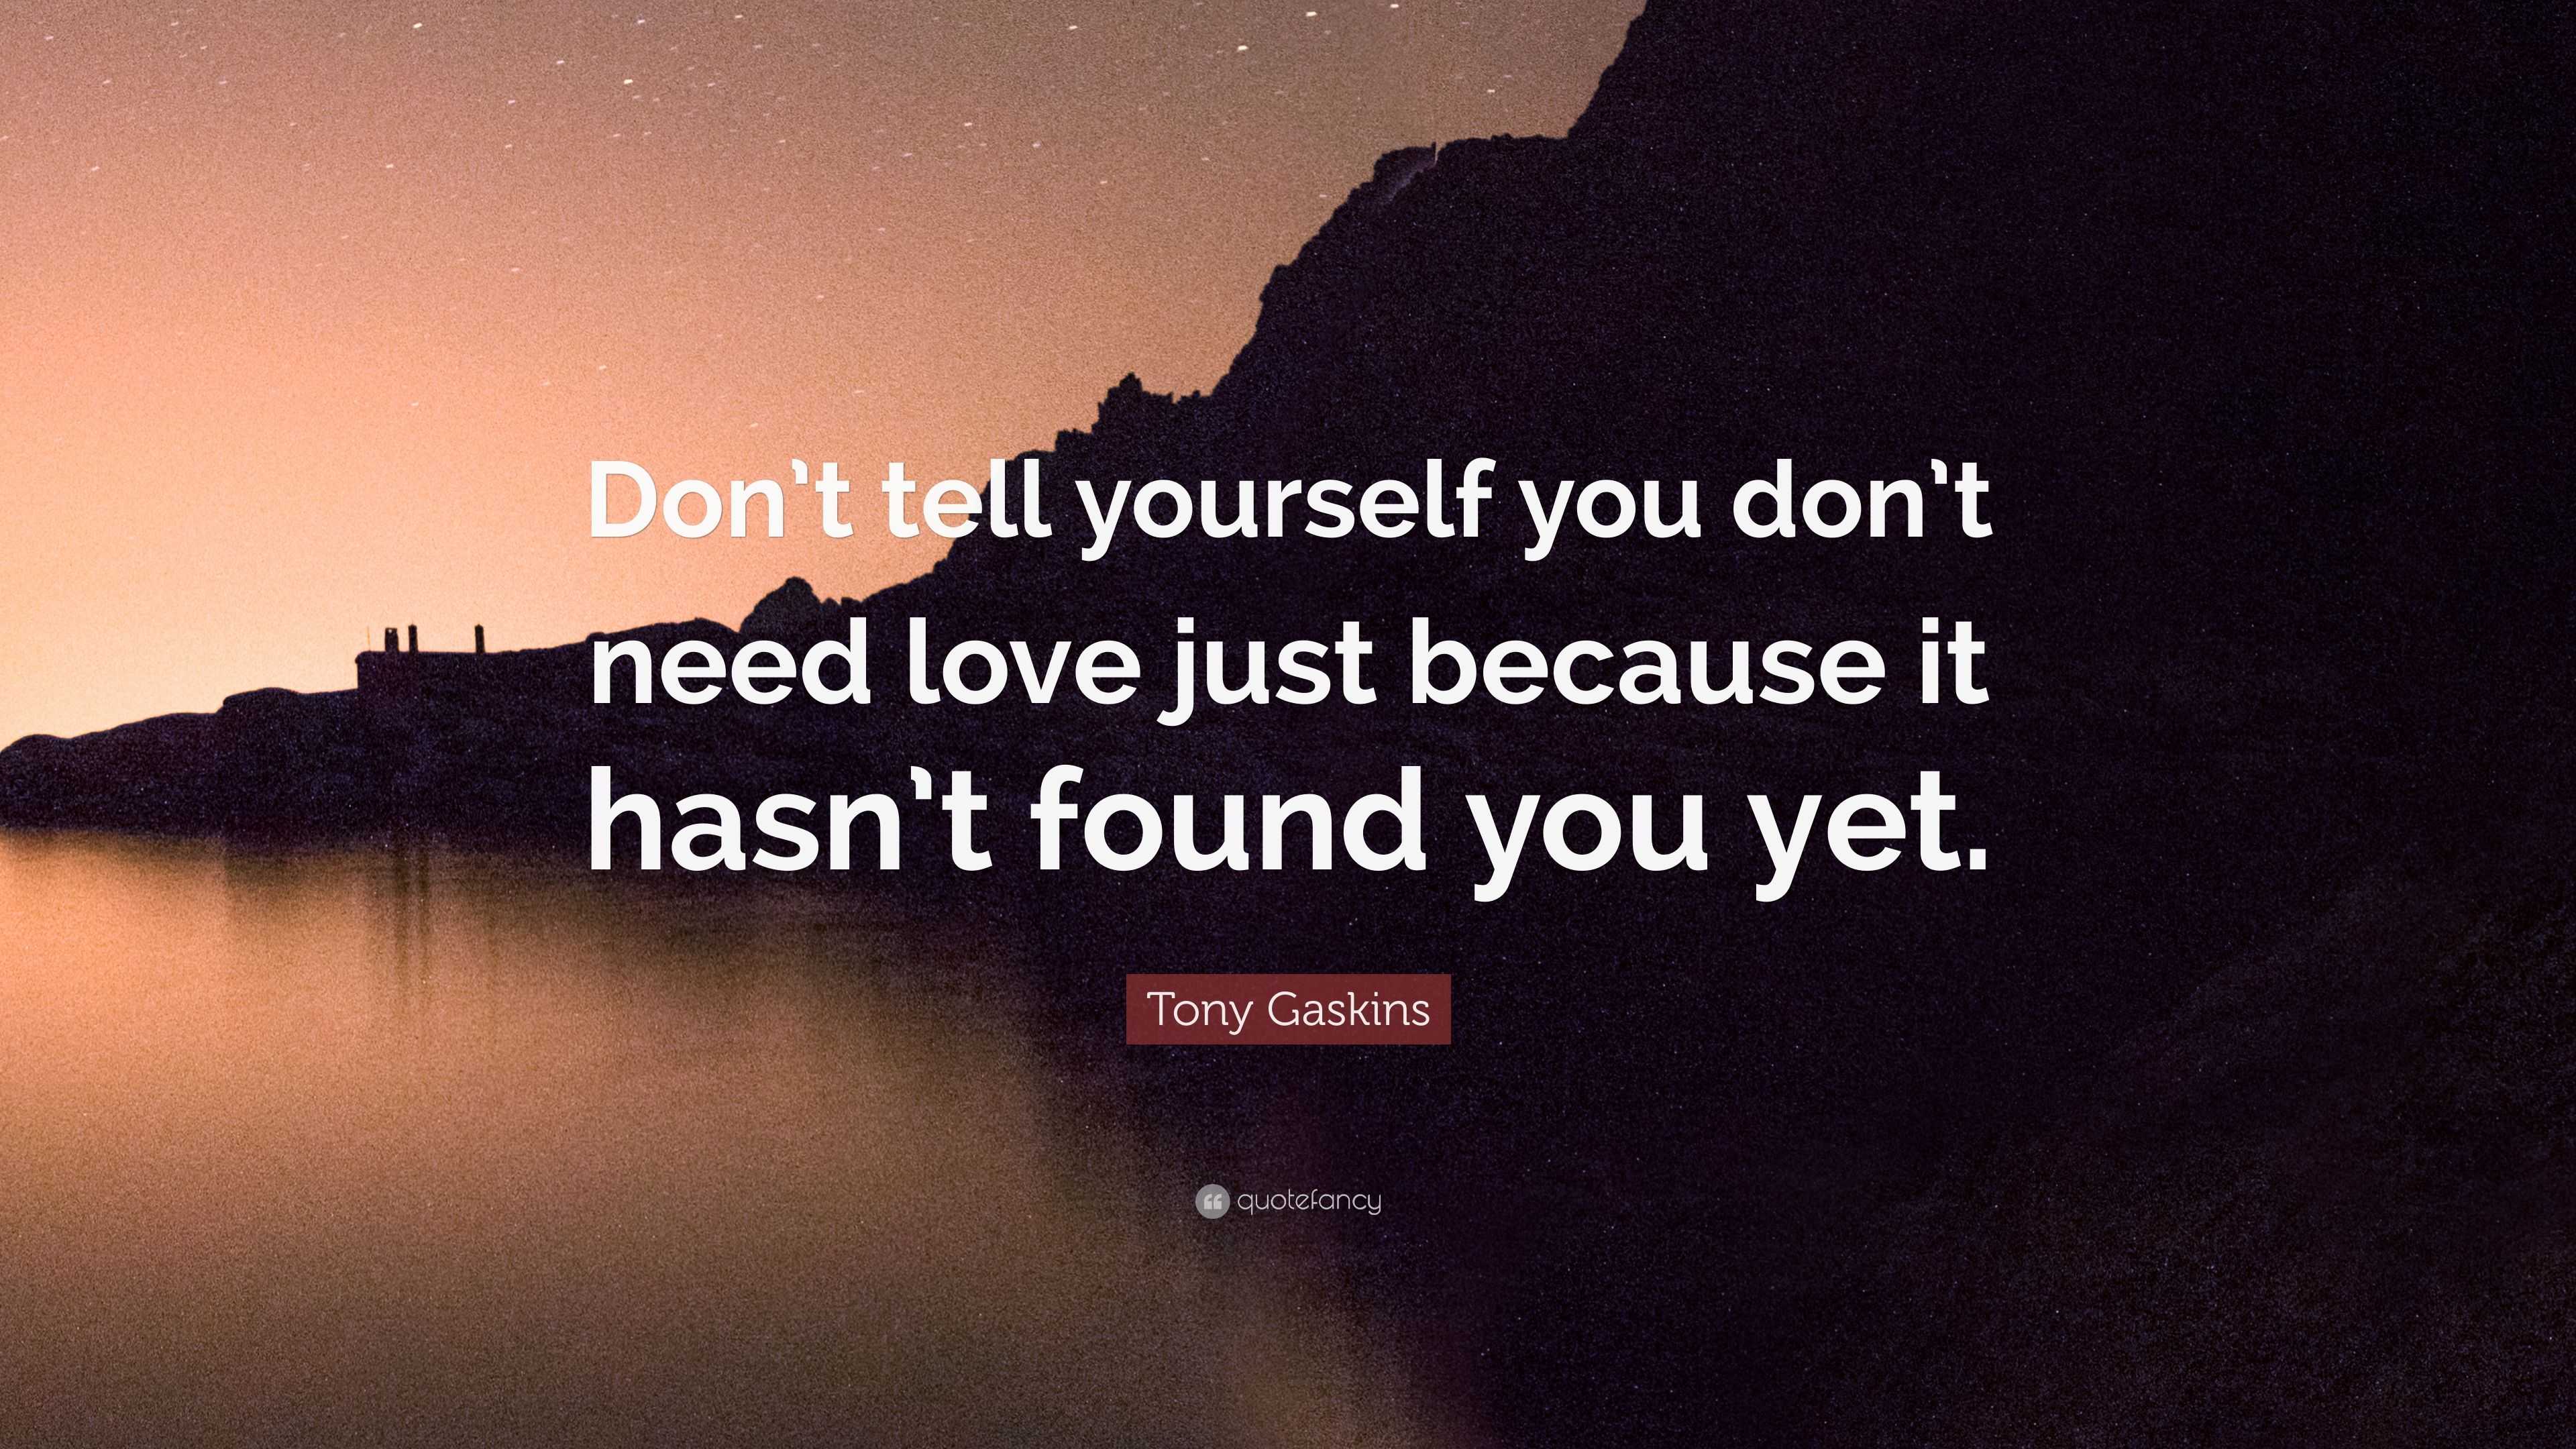 Tony Gaskins Quote “Don t tell yourself you don t need love